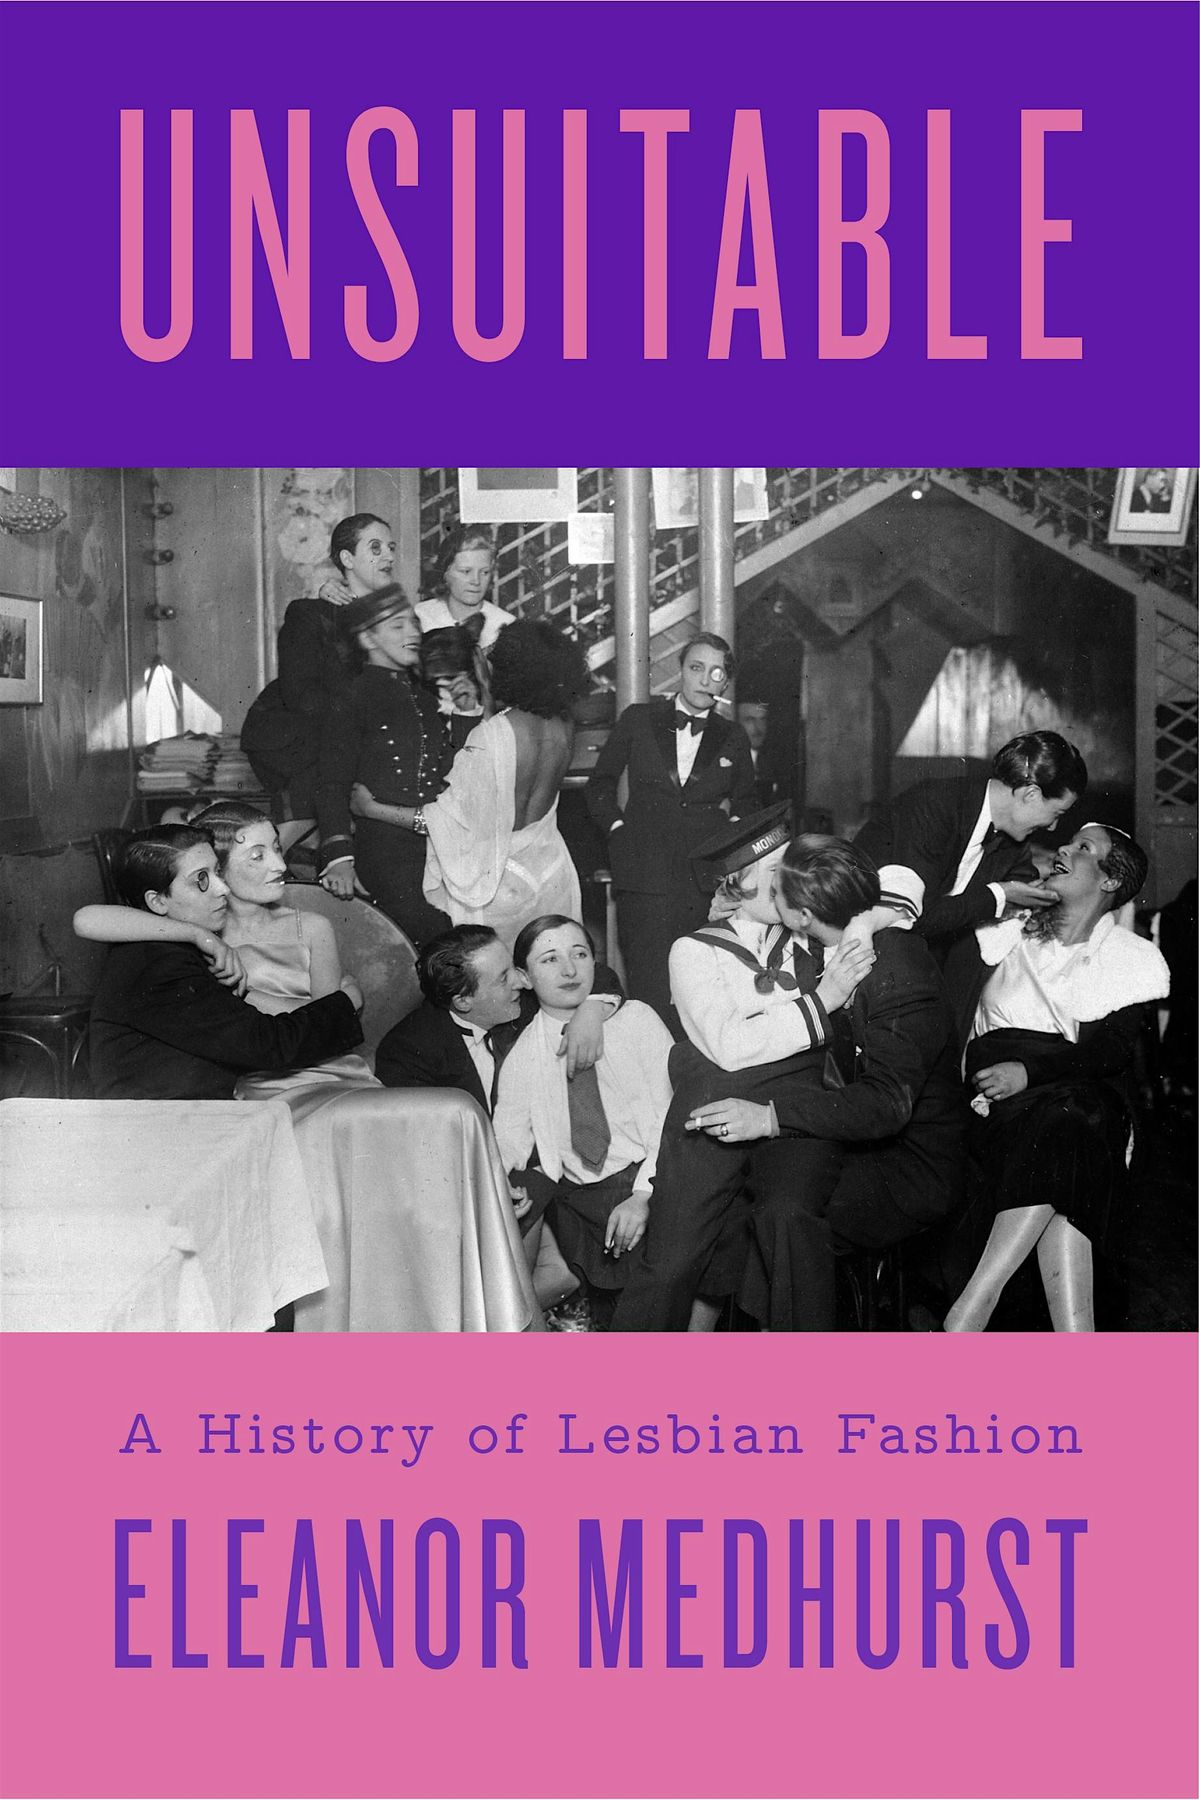 An evening with Eleanor Medhurst at Glasgow Sauchiehall St: Unsuitable